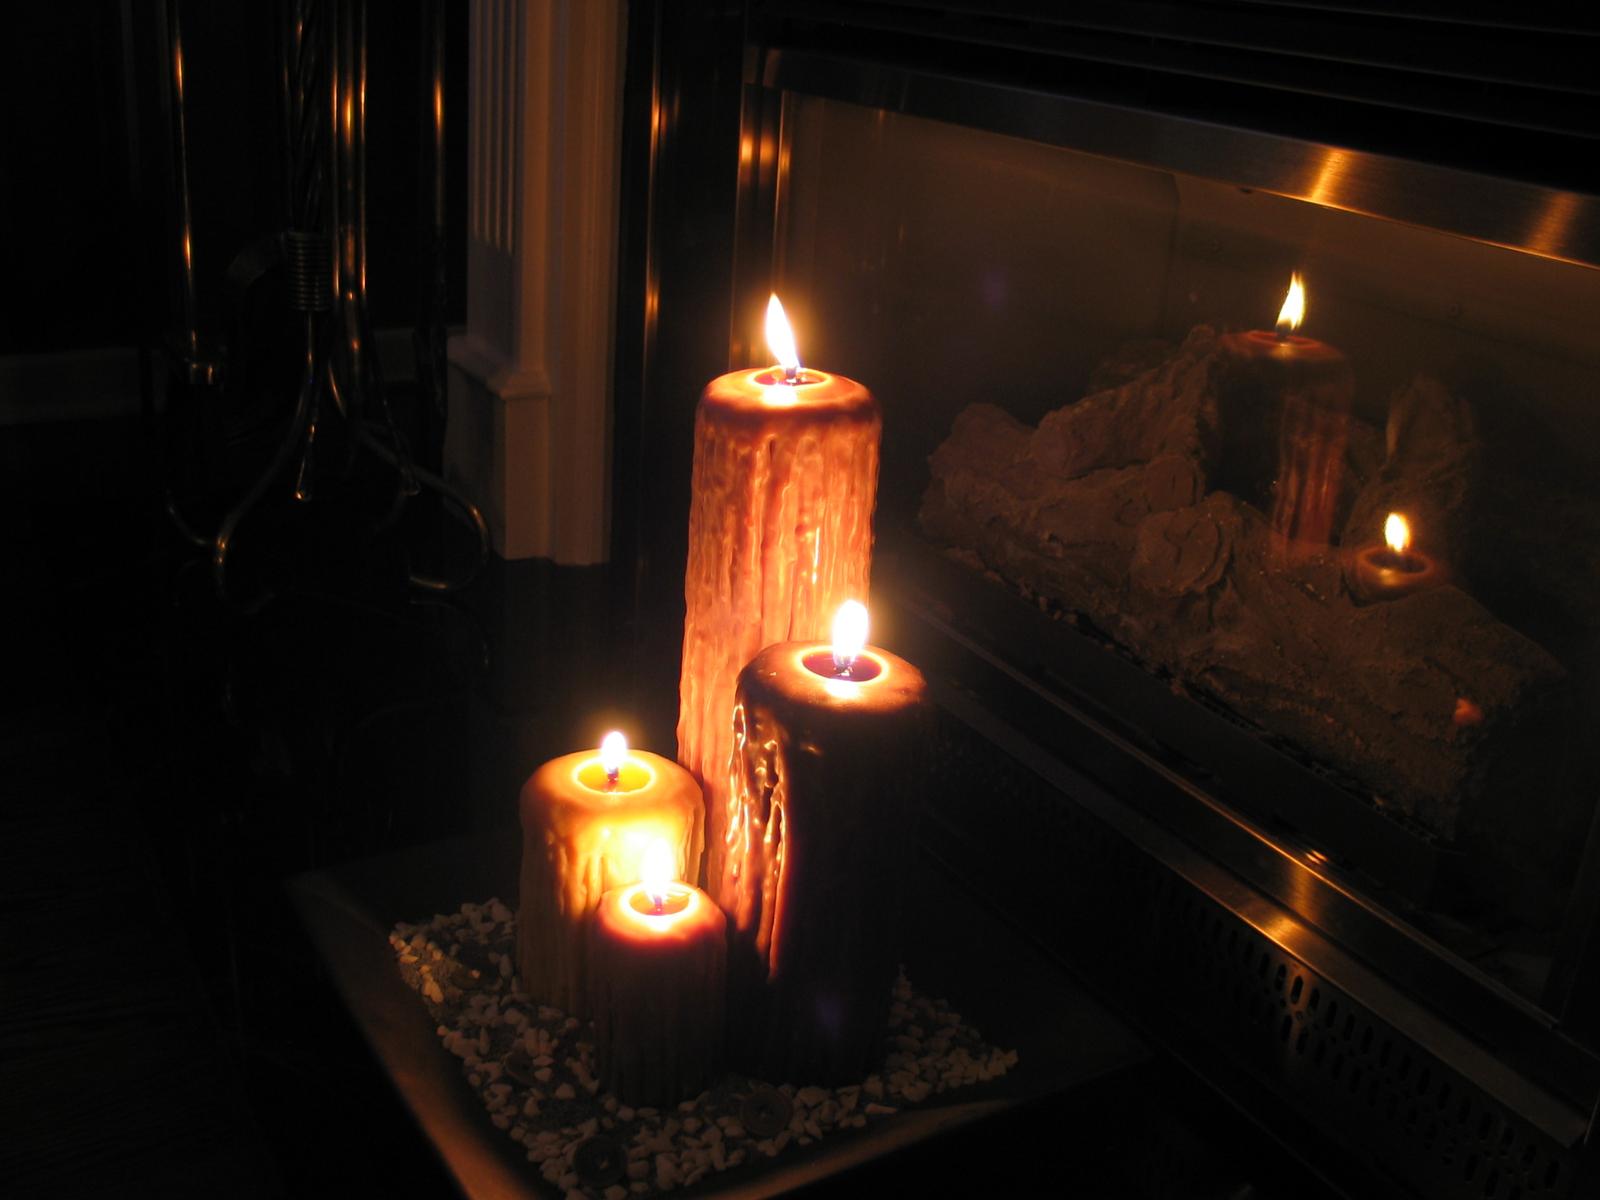 Candles on the fireplace